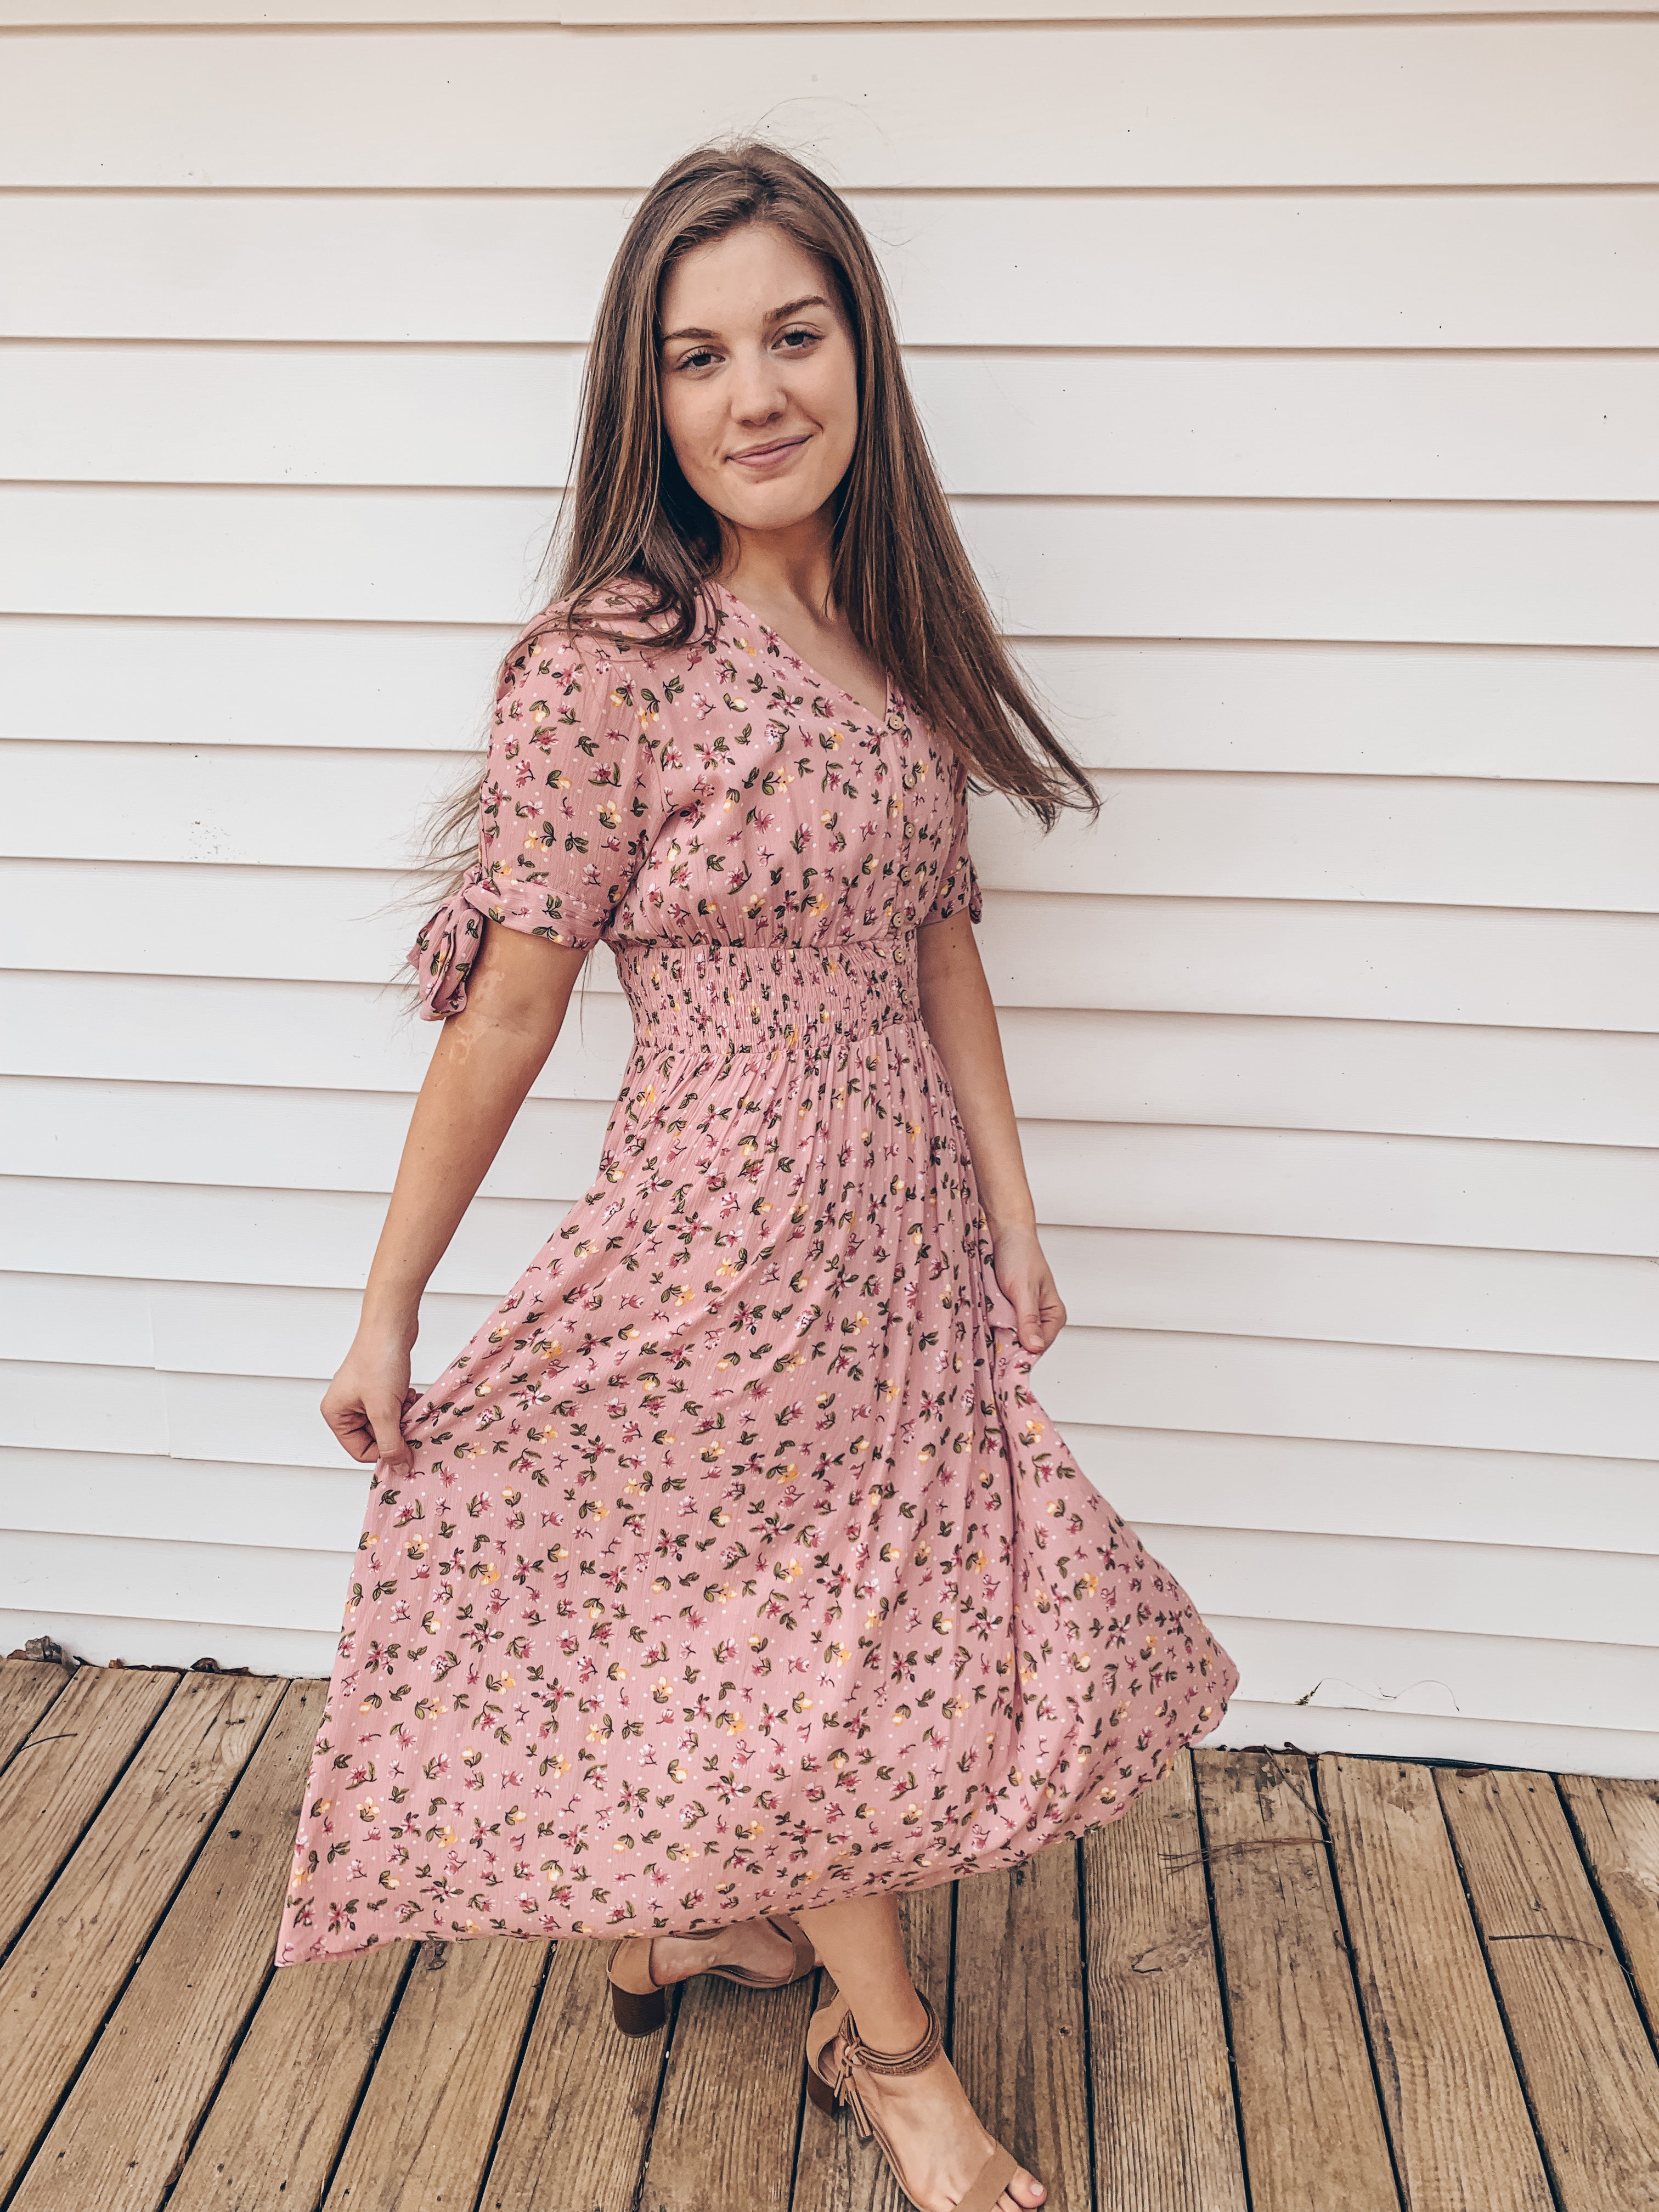 The Rose Dress – Temple's